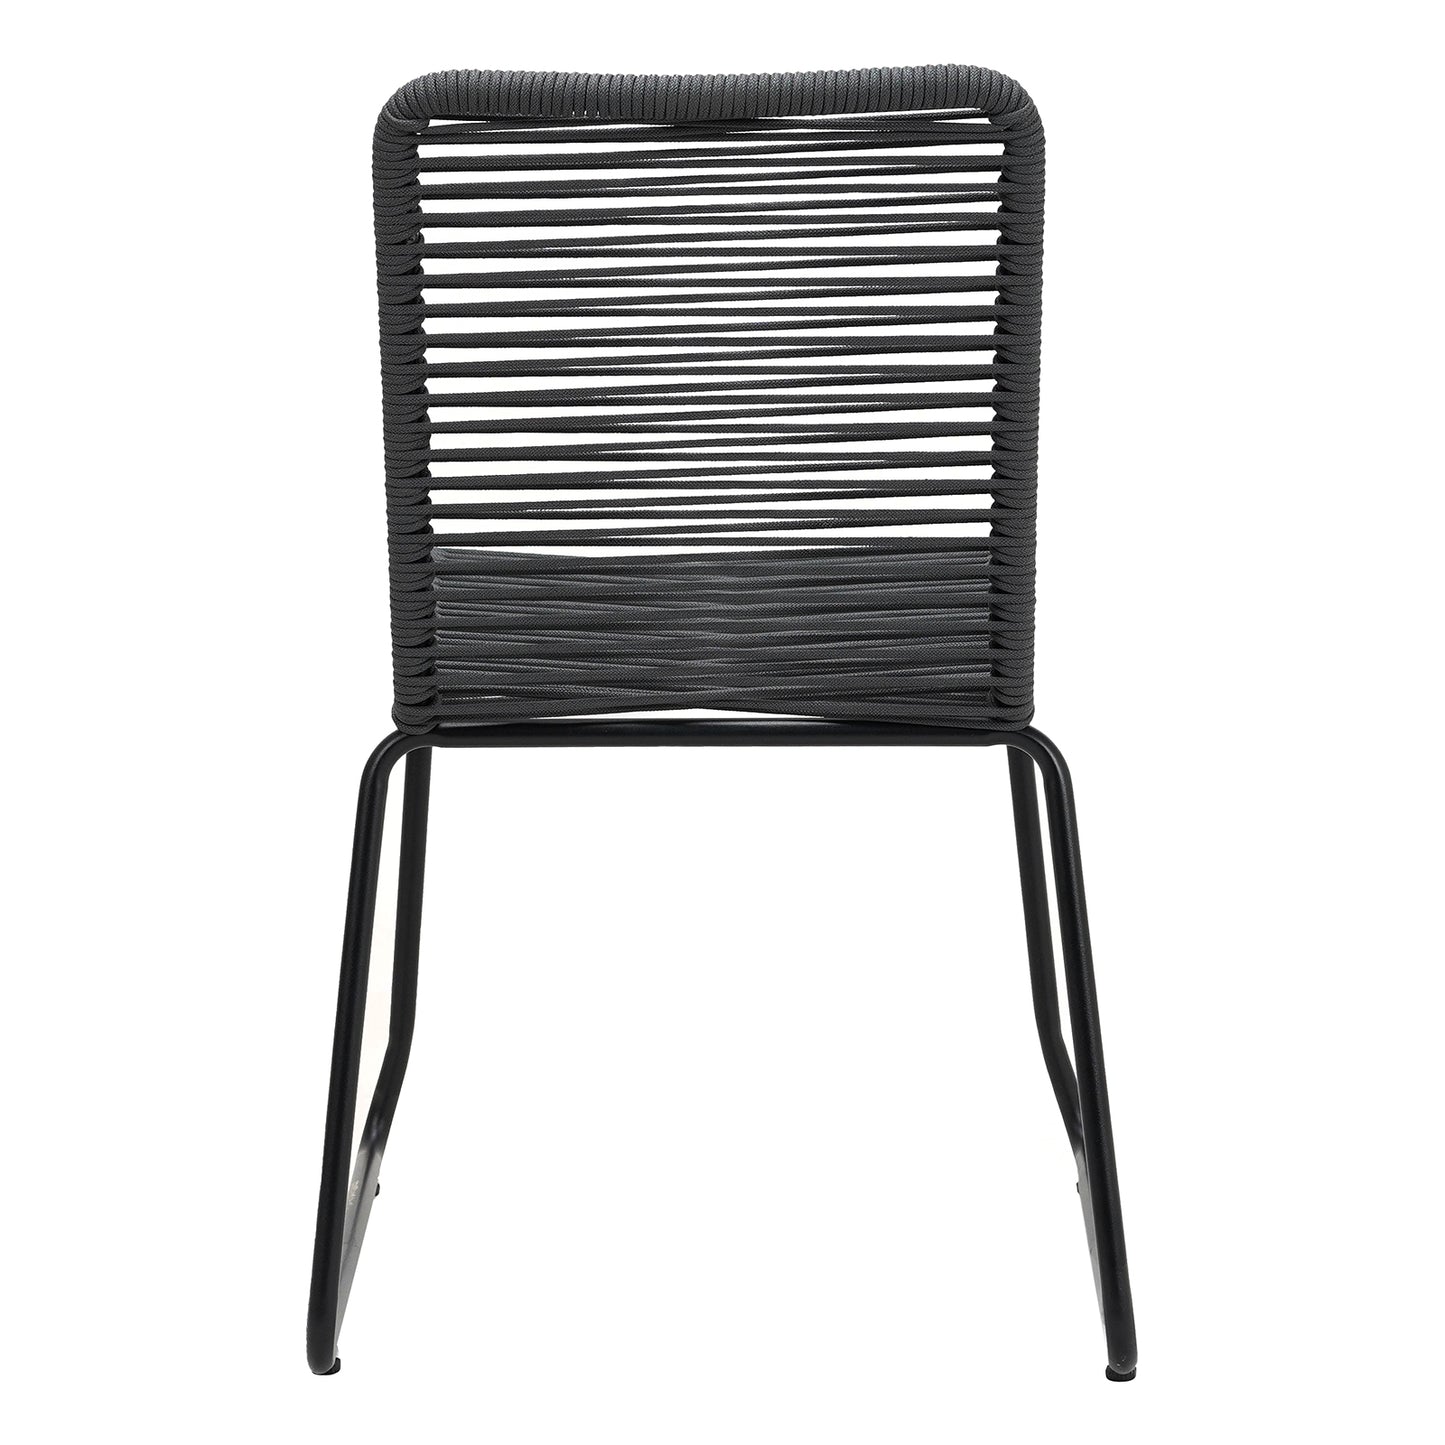 Sahara | Woven Robe Charcoal Metal Outdoor Dining Chairs | Set Of 4 | Charcoal